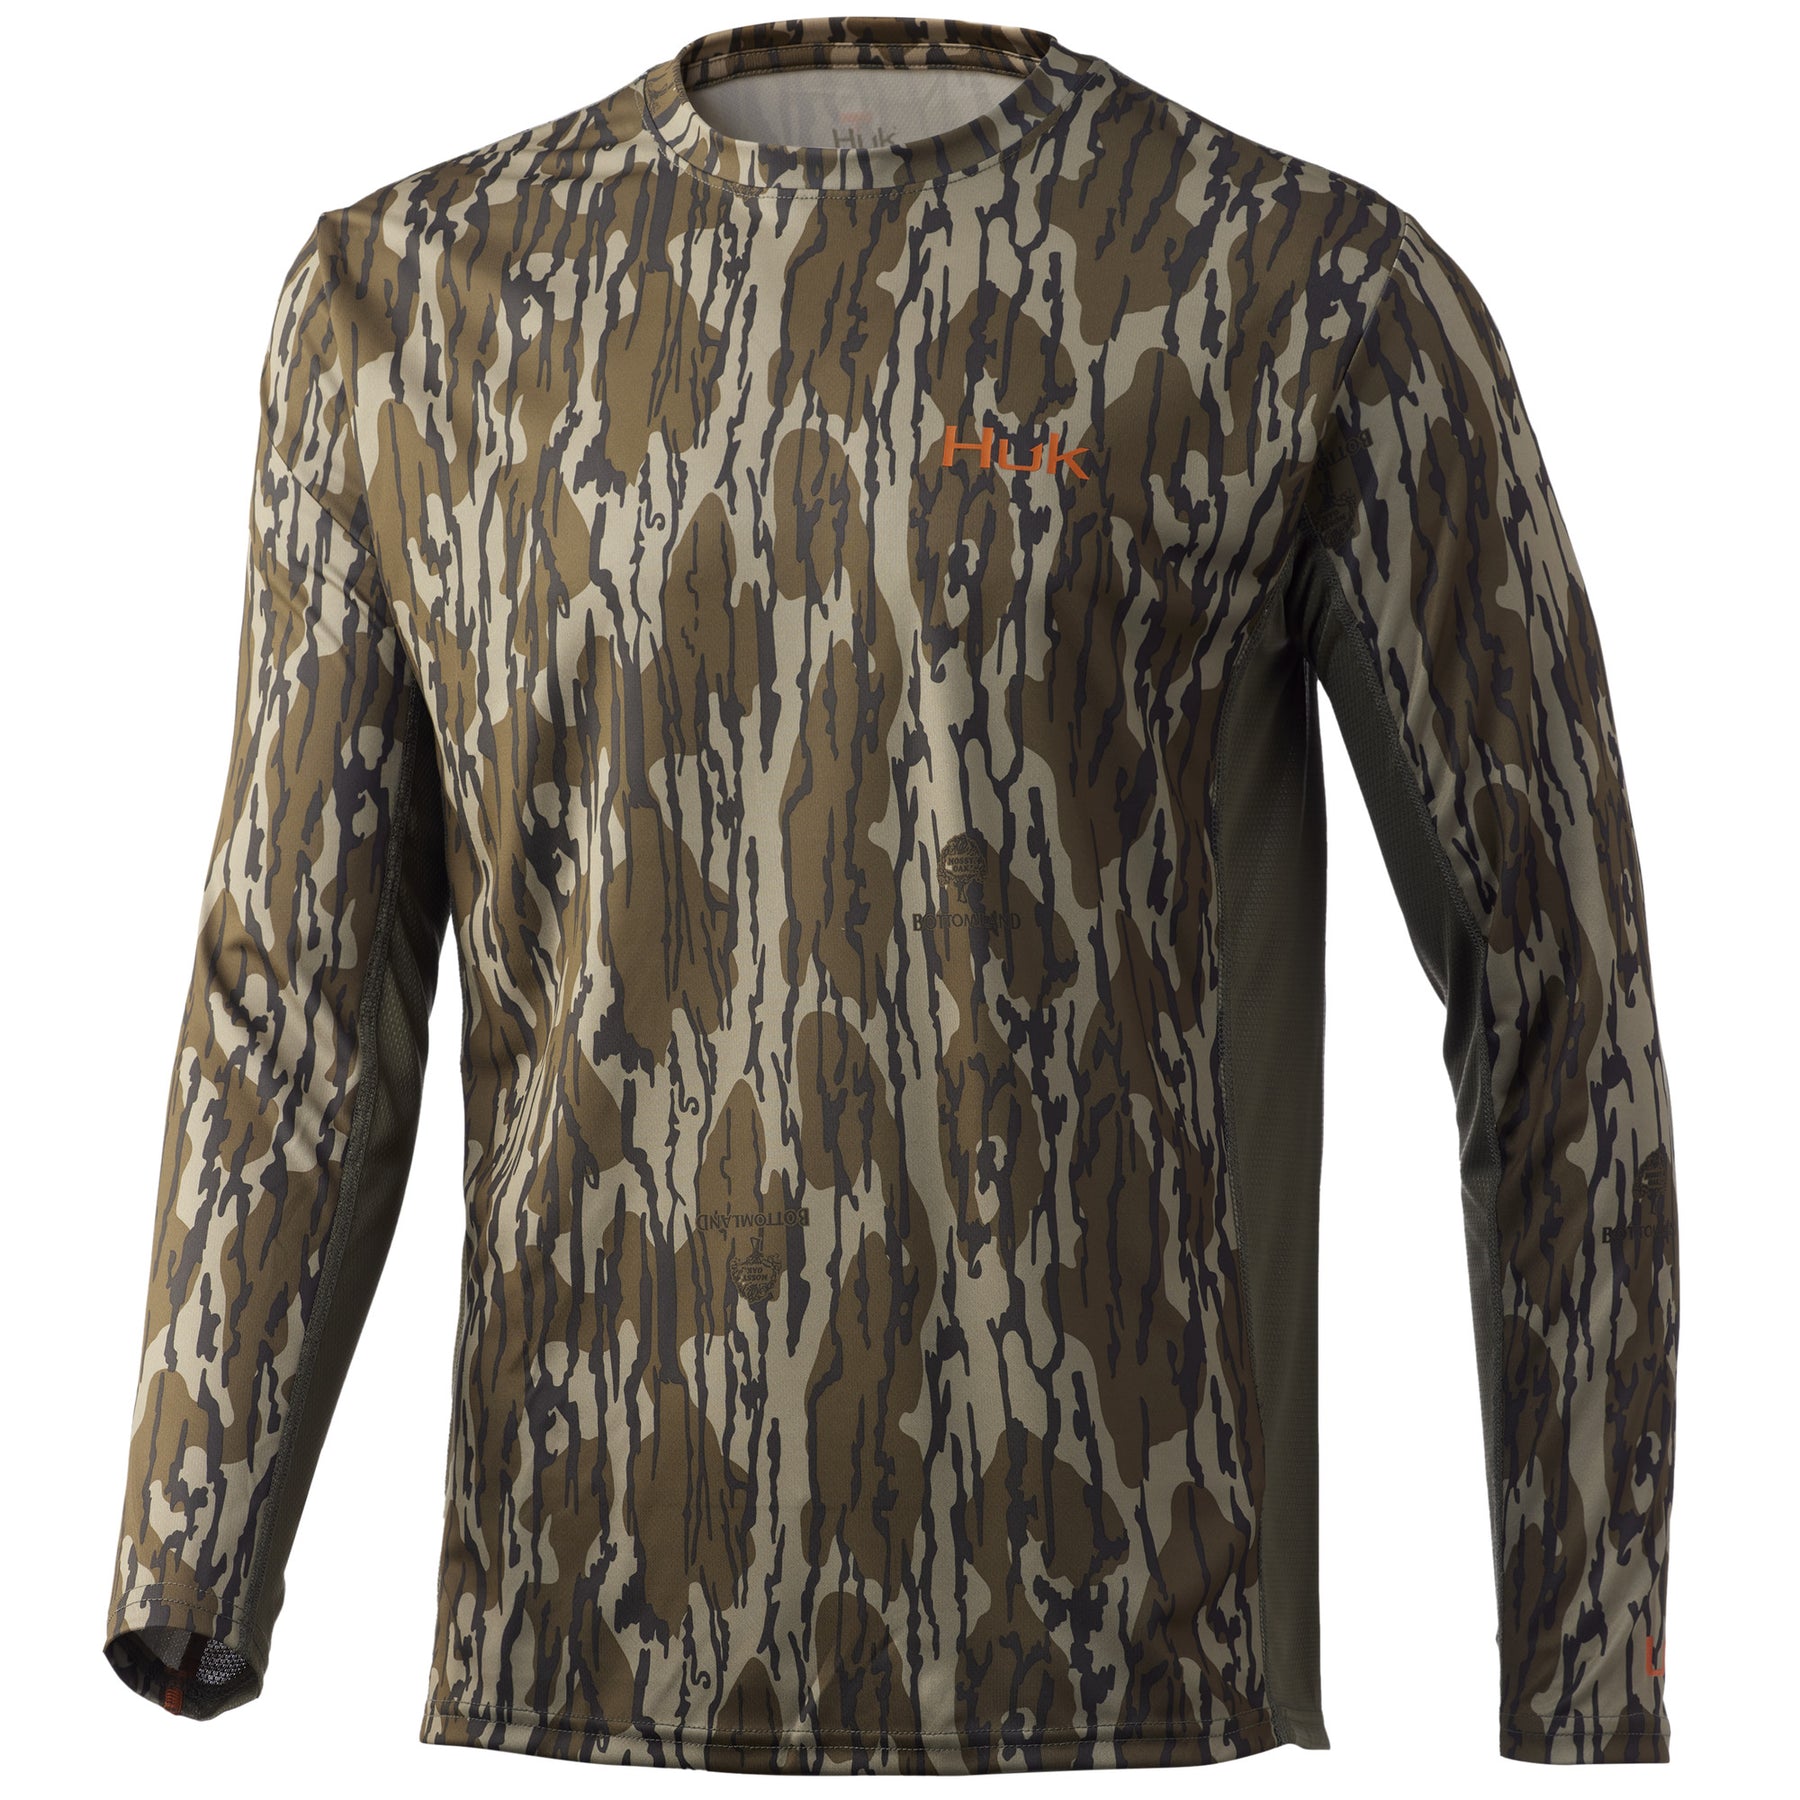 Huk Fishing Youth Pursuit Mossy Oak Crew Long Sleeve T-Shirt for